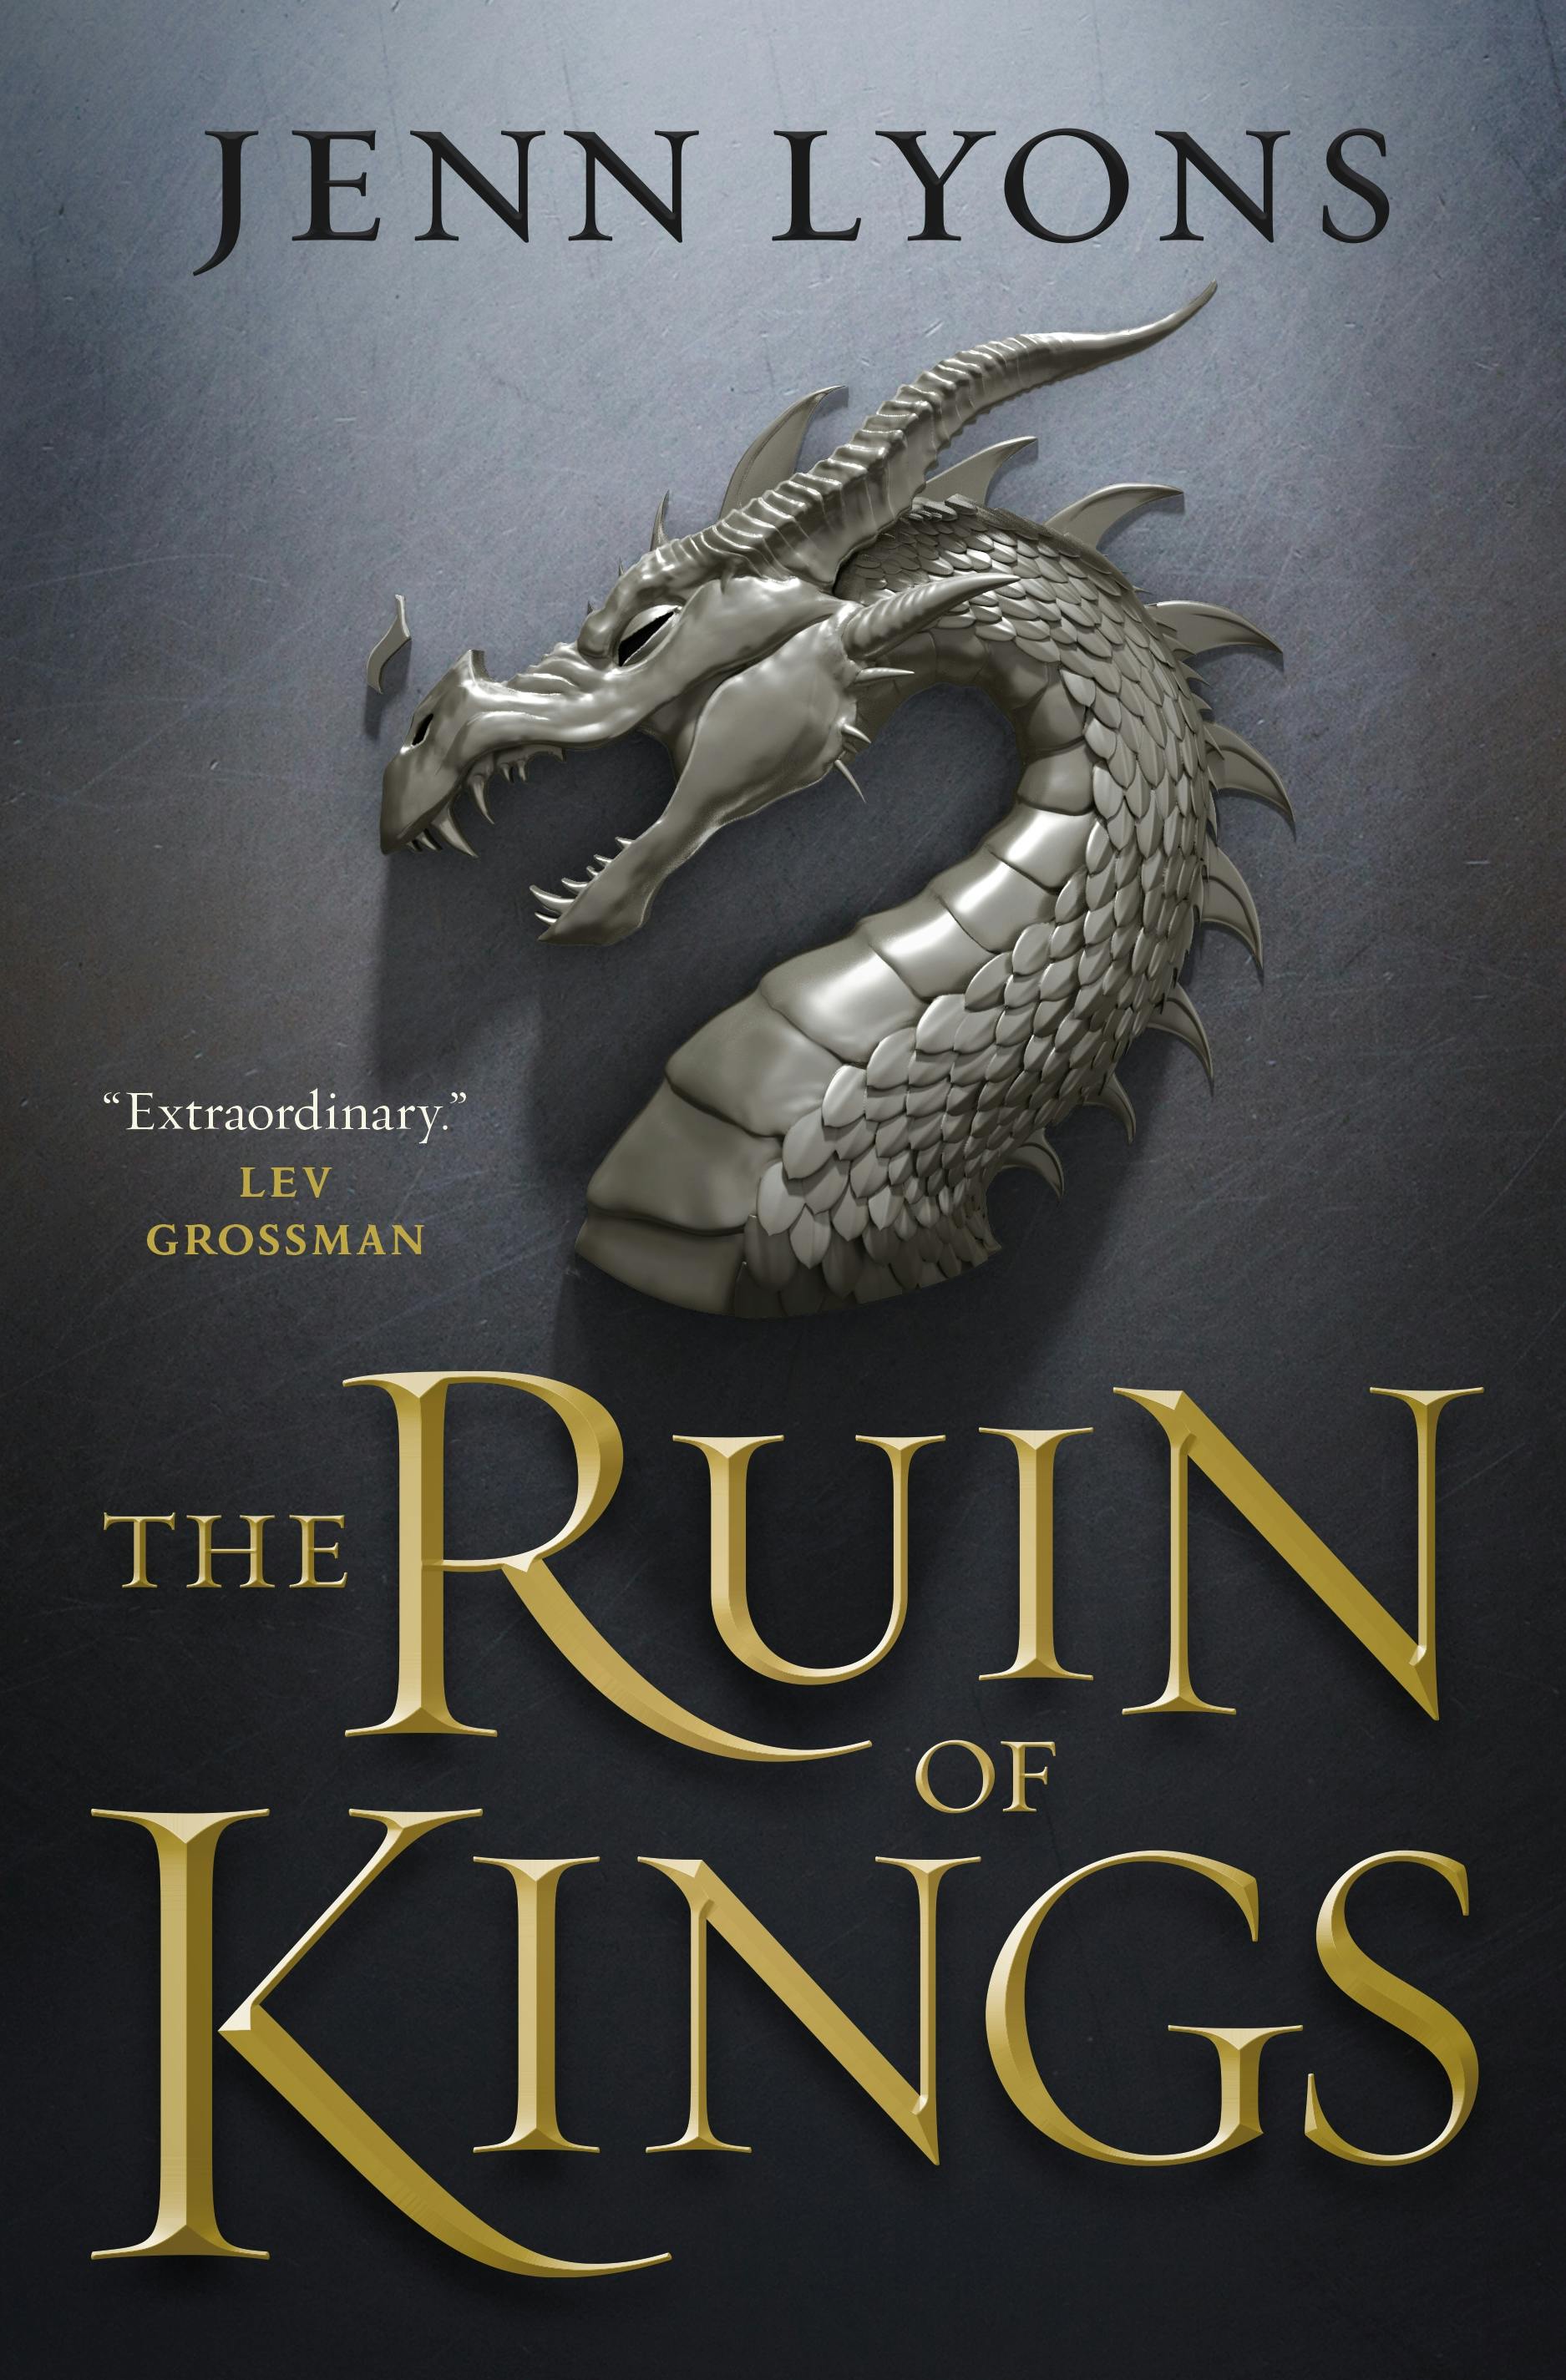 Cover for the book titled as: The Ruin of Kings